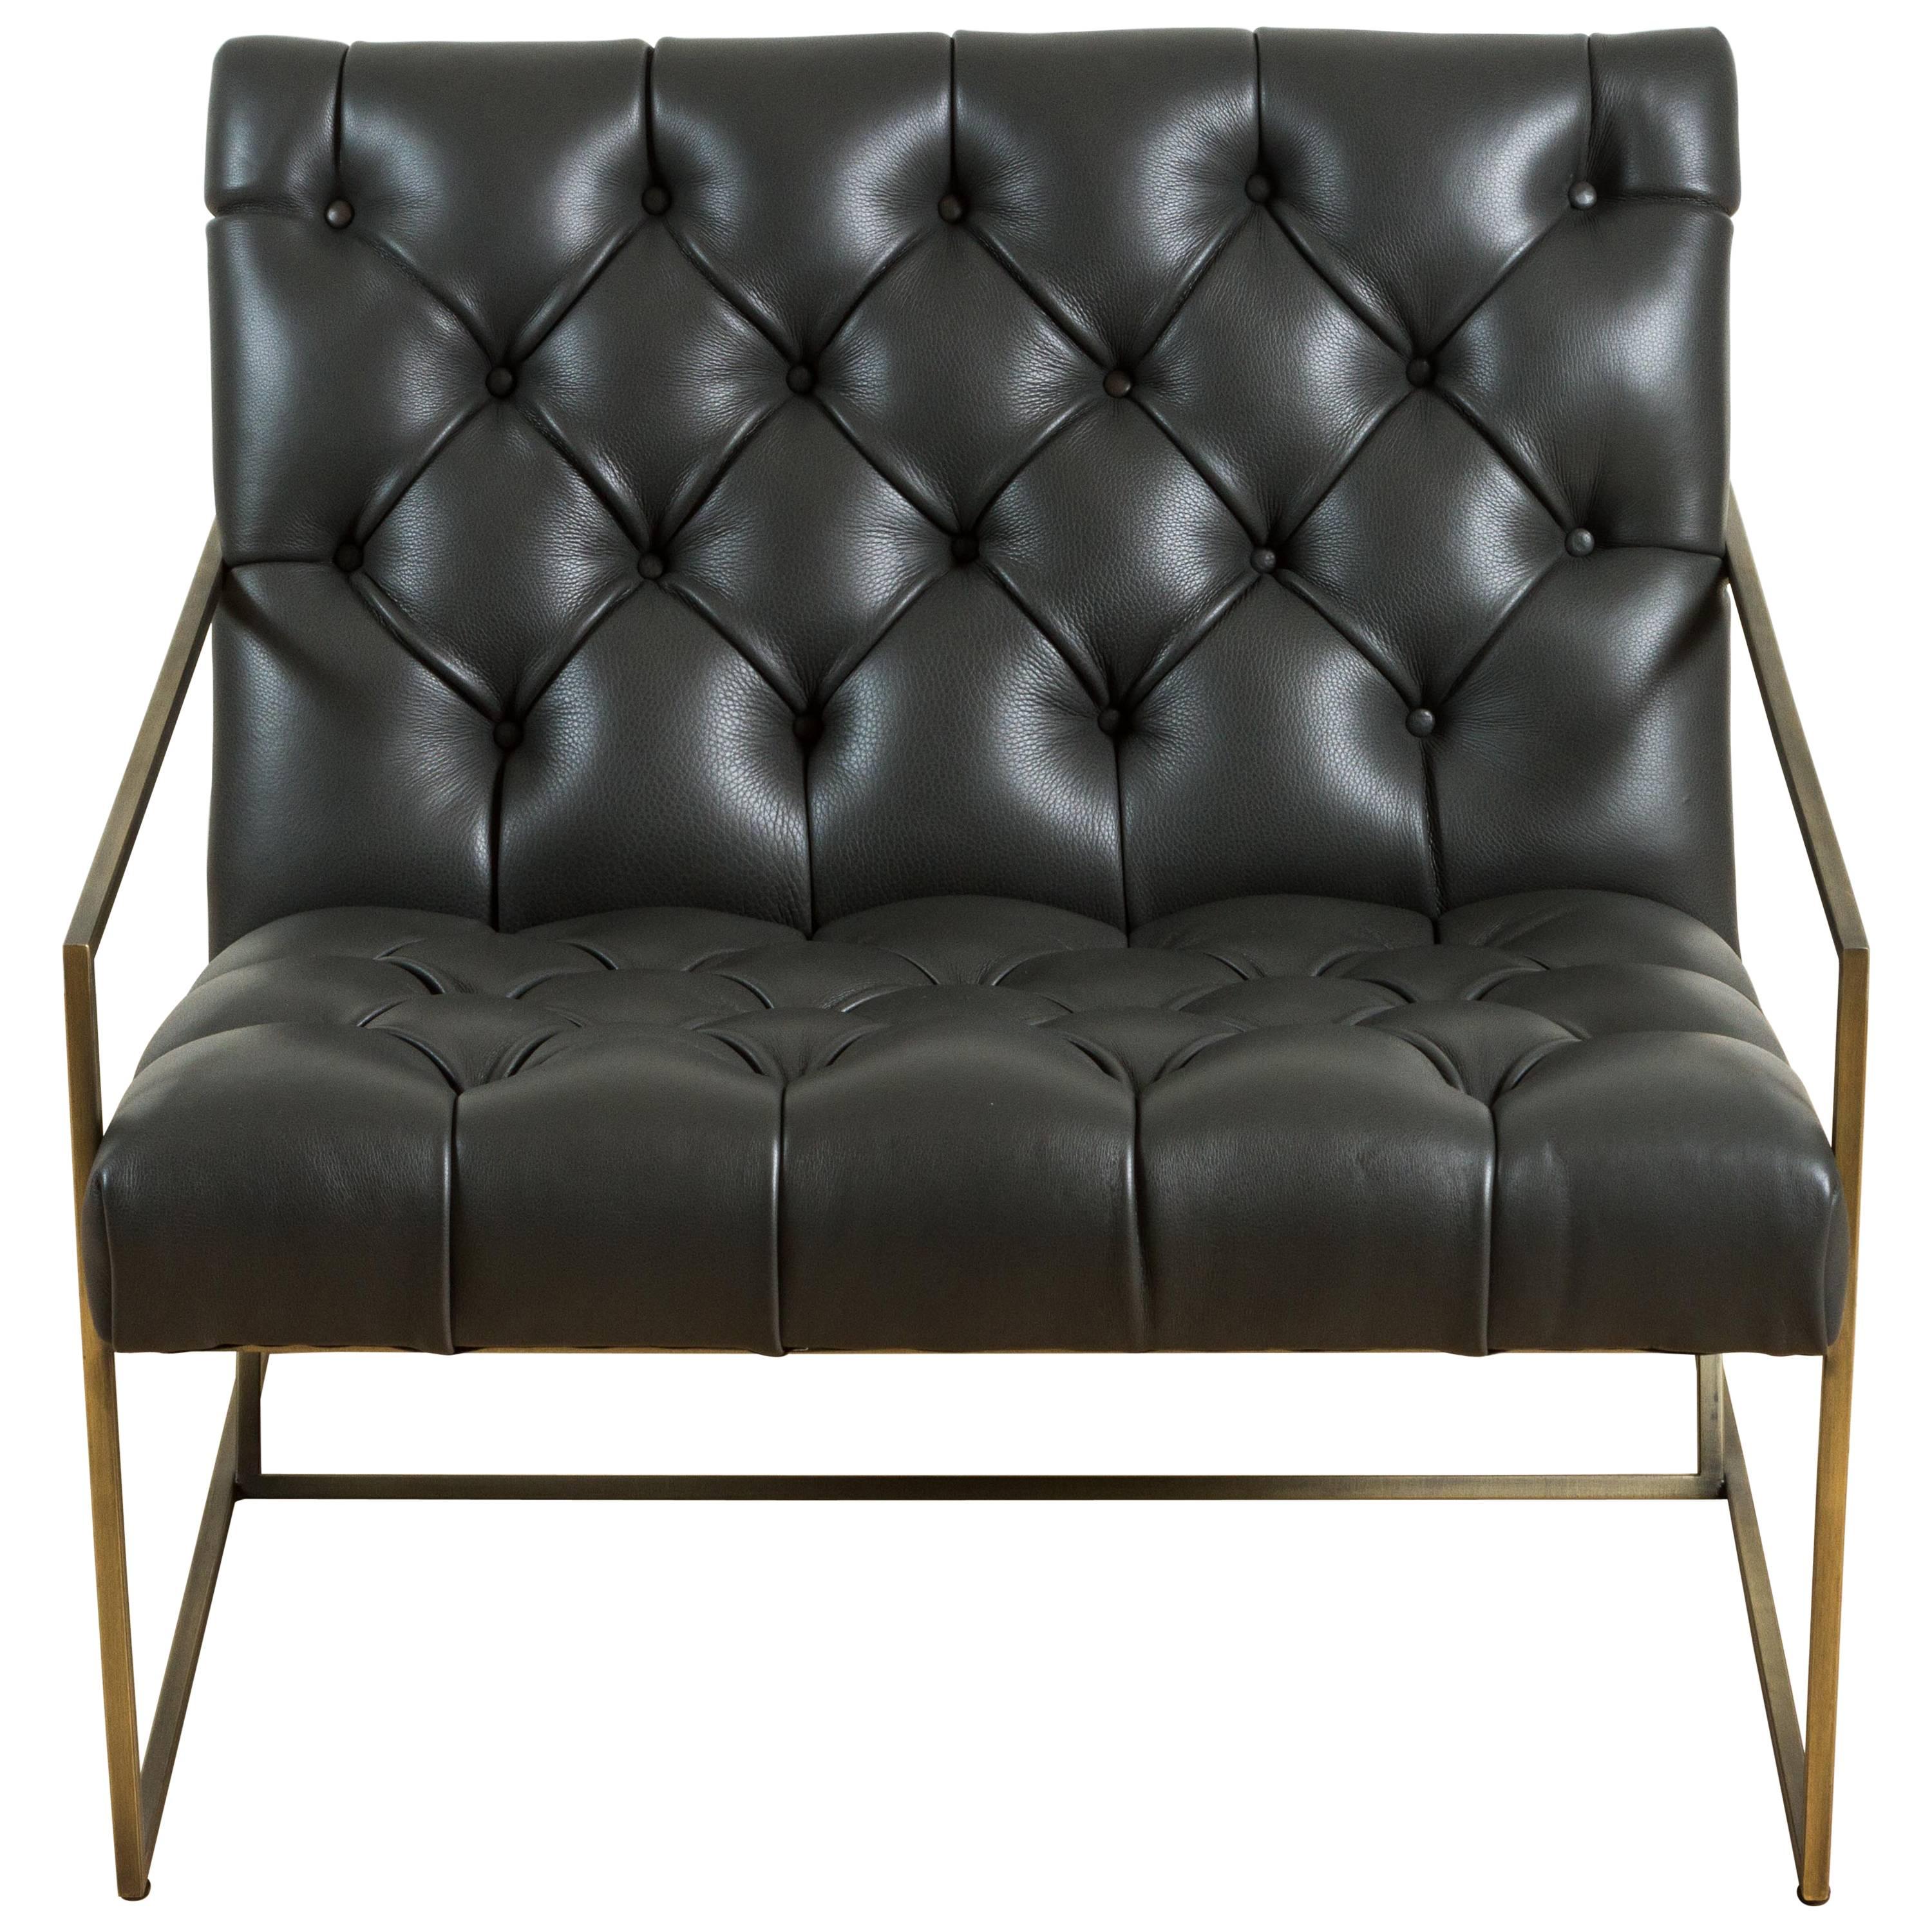 Thin Frame Lounge Chair in Diamond Tufted Charcoal Leather by Lawson-Fenning